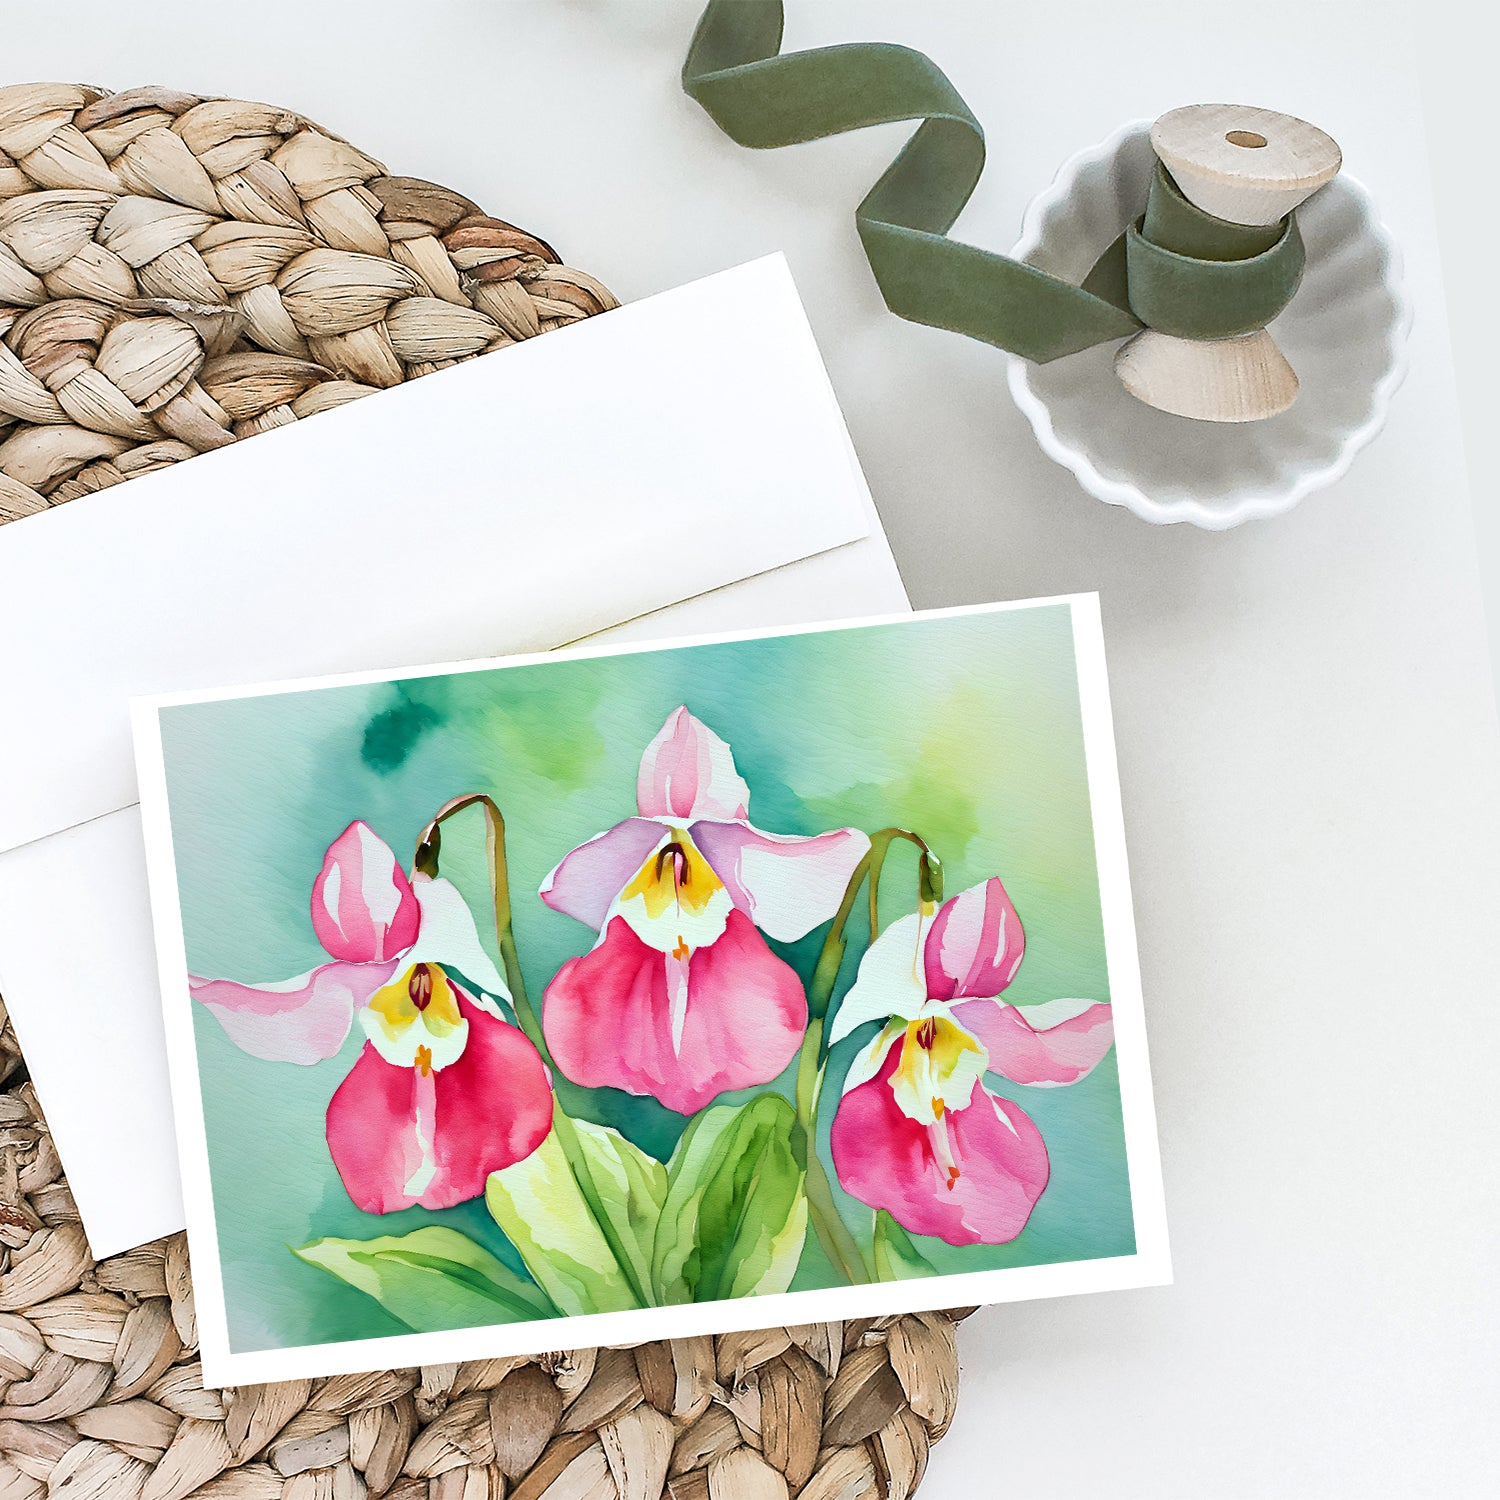 Minnesota Pink and White Lady’s Slippers in Watercolor Greeting Cards and Envelopes Pack of 8